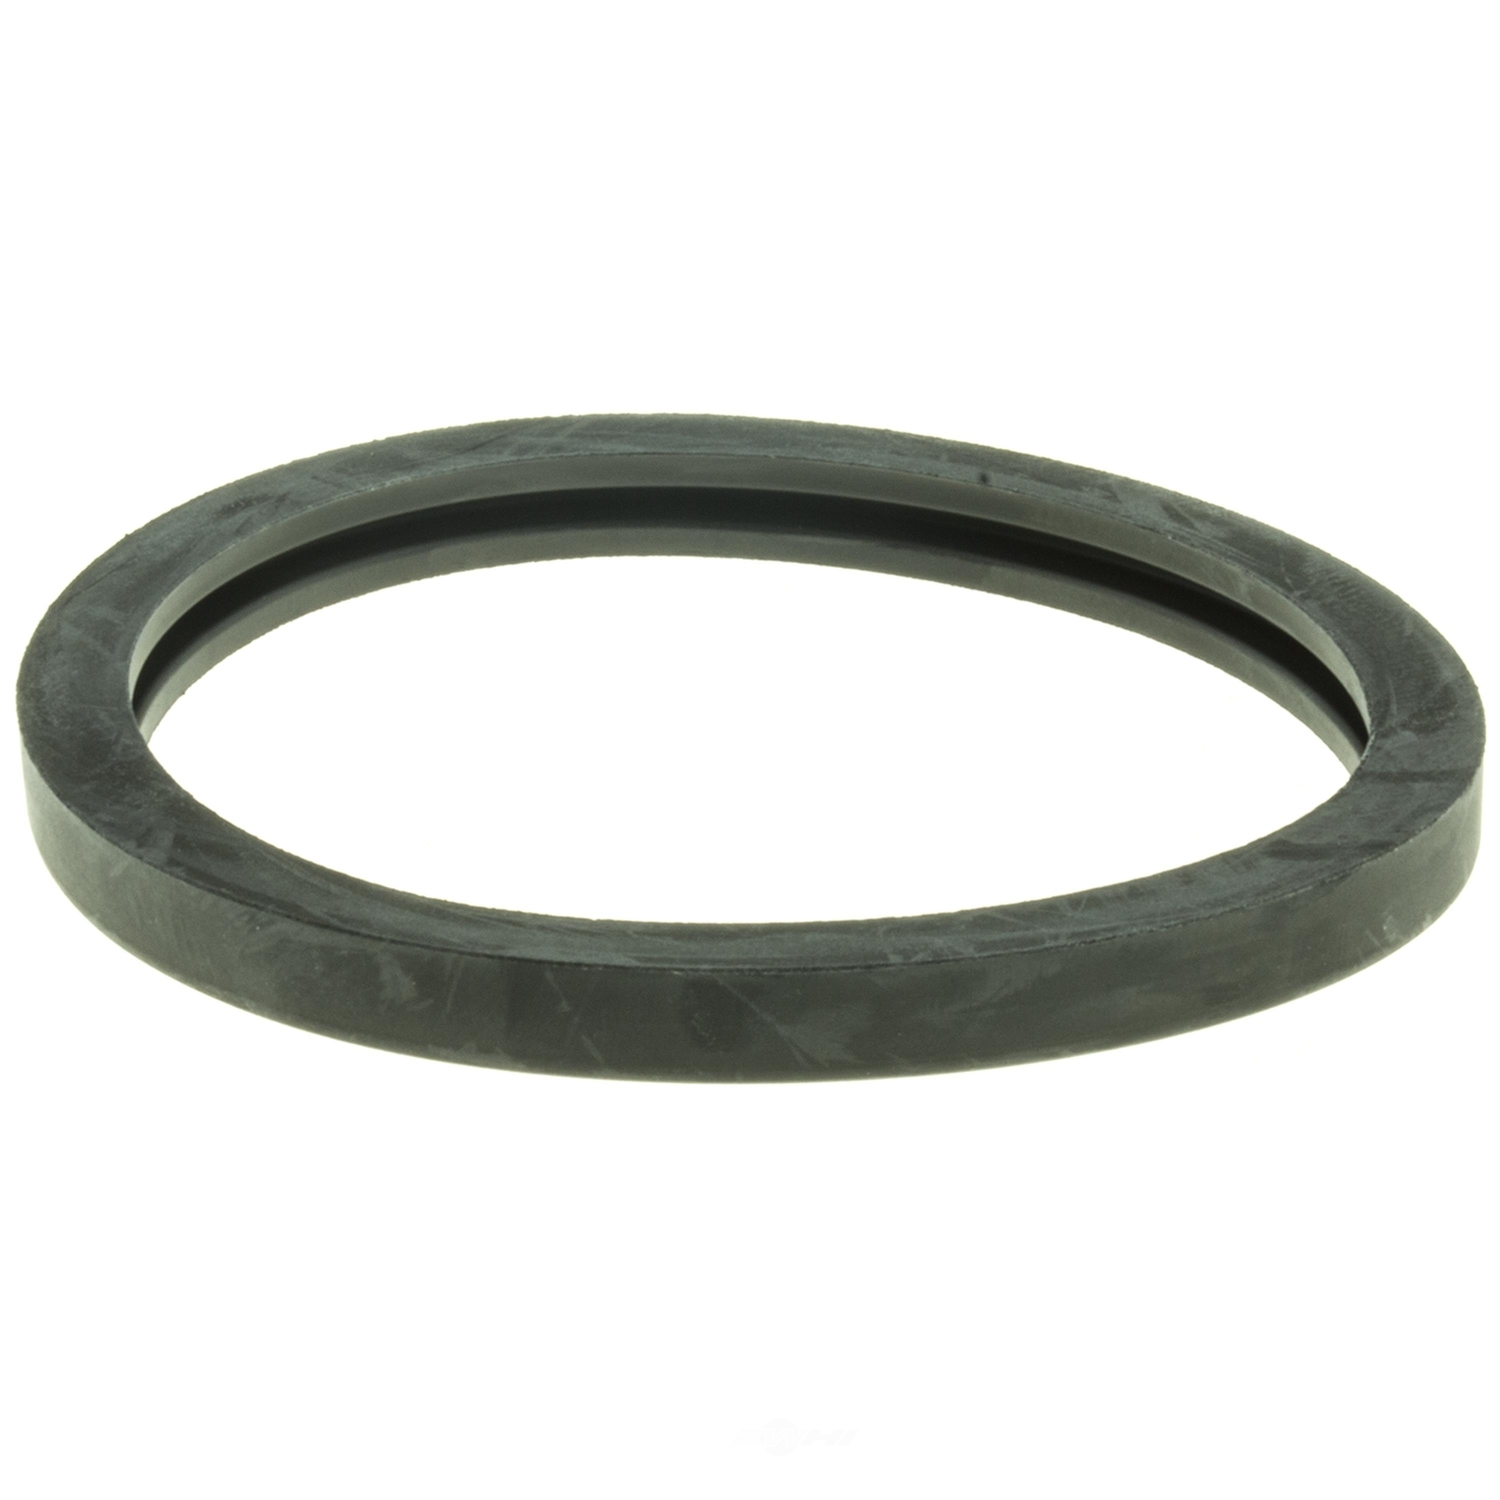 STANT - Thermostat Seal - STN 27284